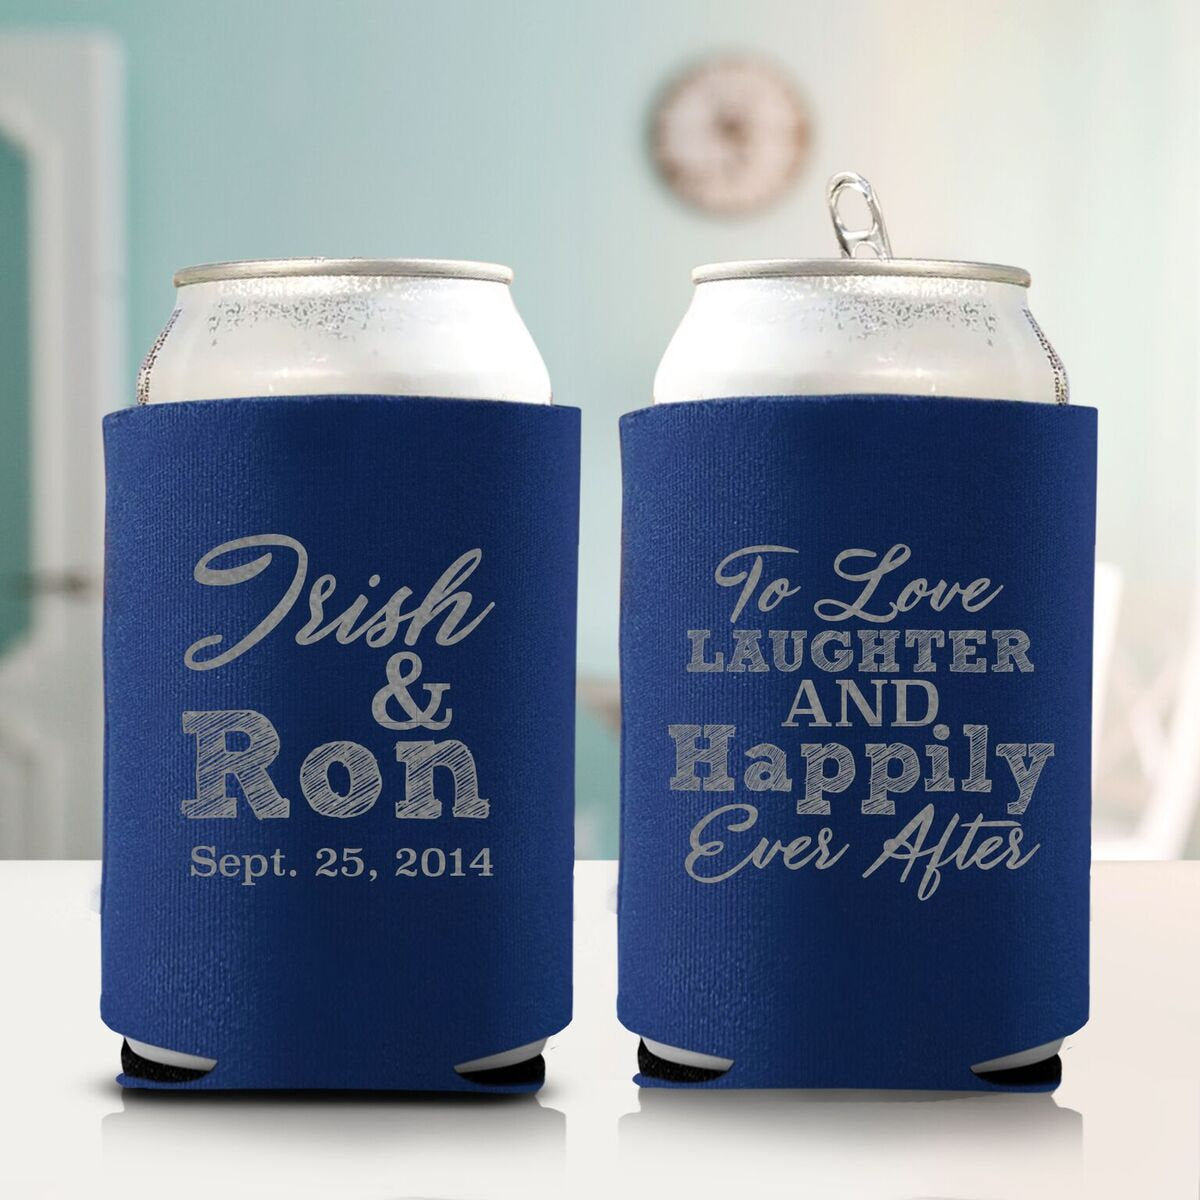 To Love Laughter and Happily Ever After Koozie